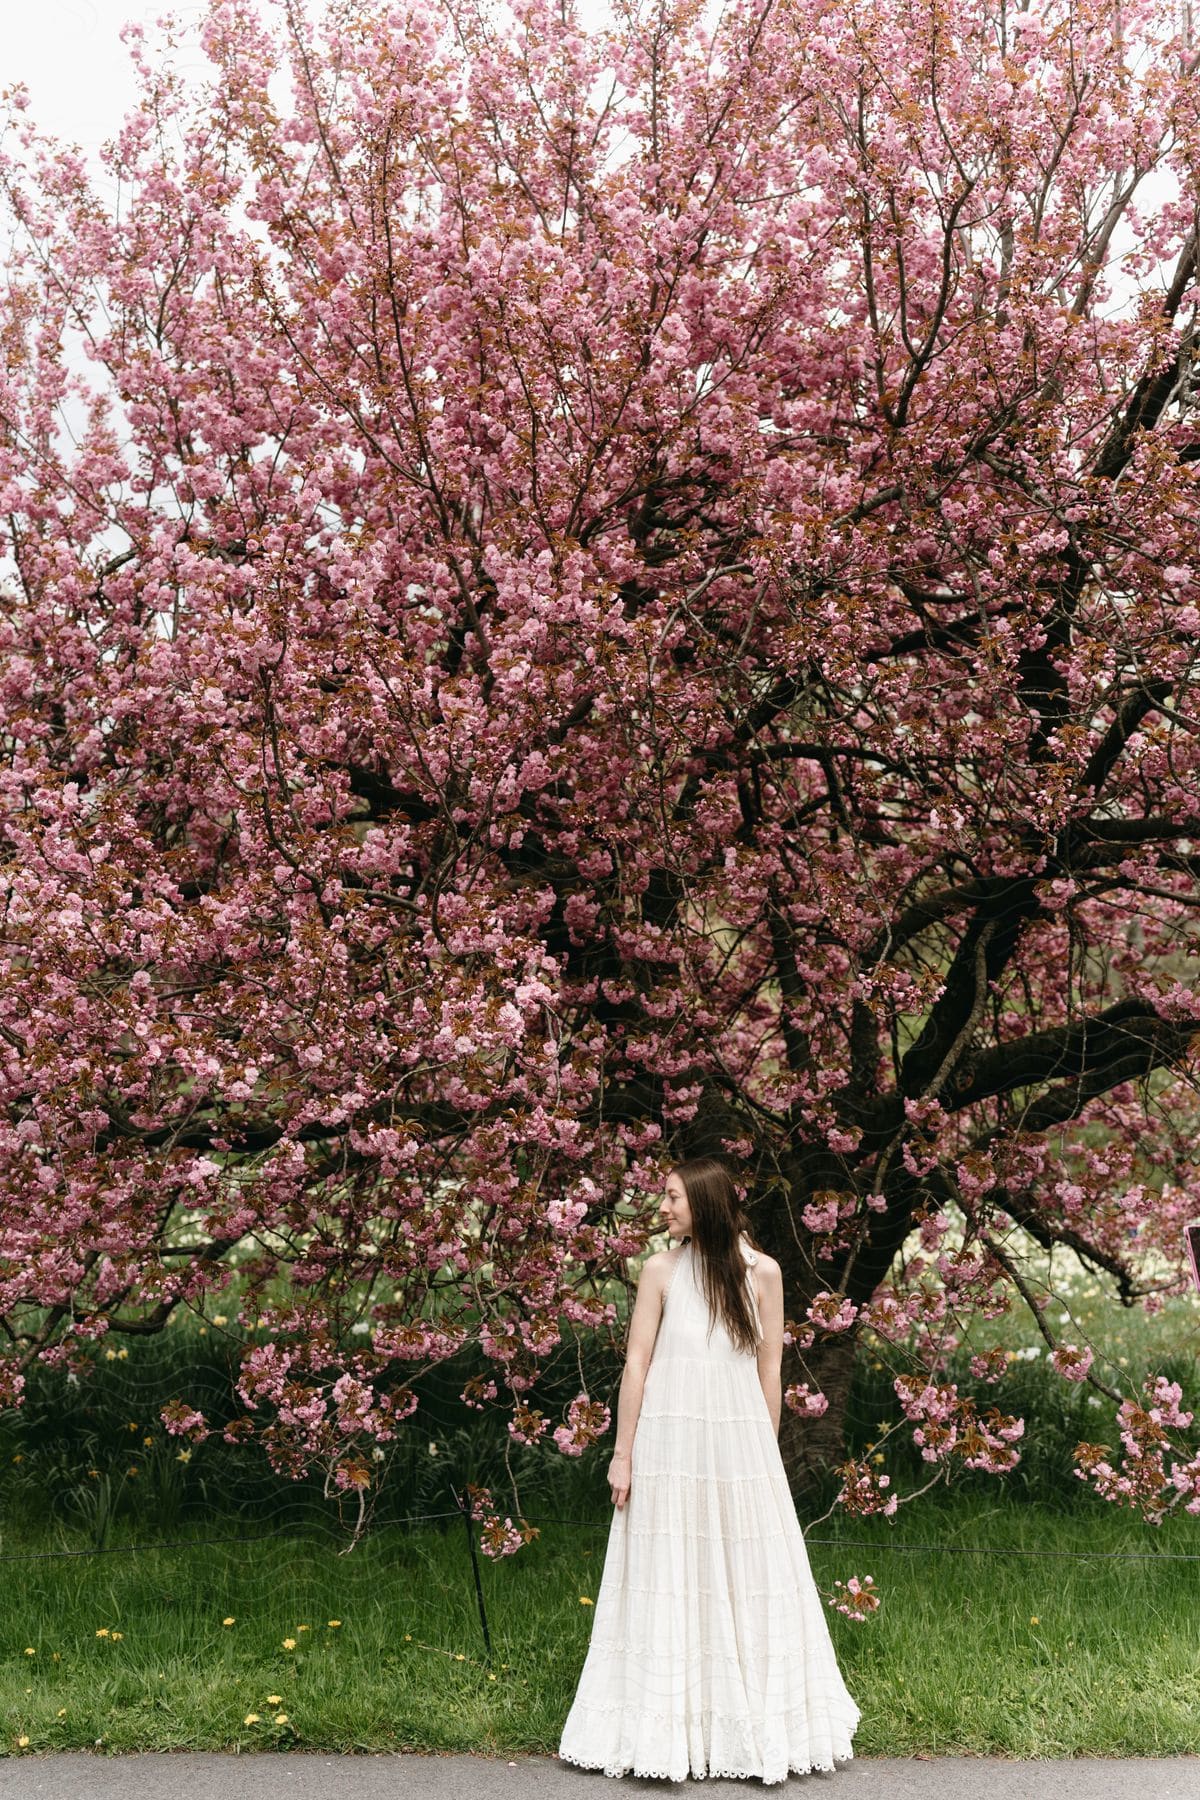 Young woman wearing a long white gown stands near a flowering cherry tree with her head turned